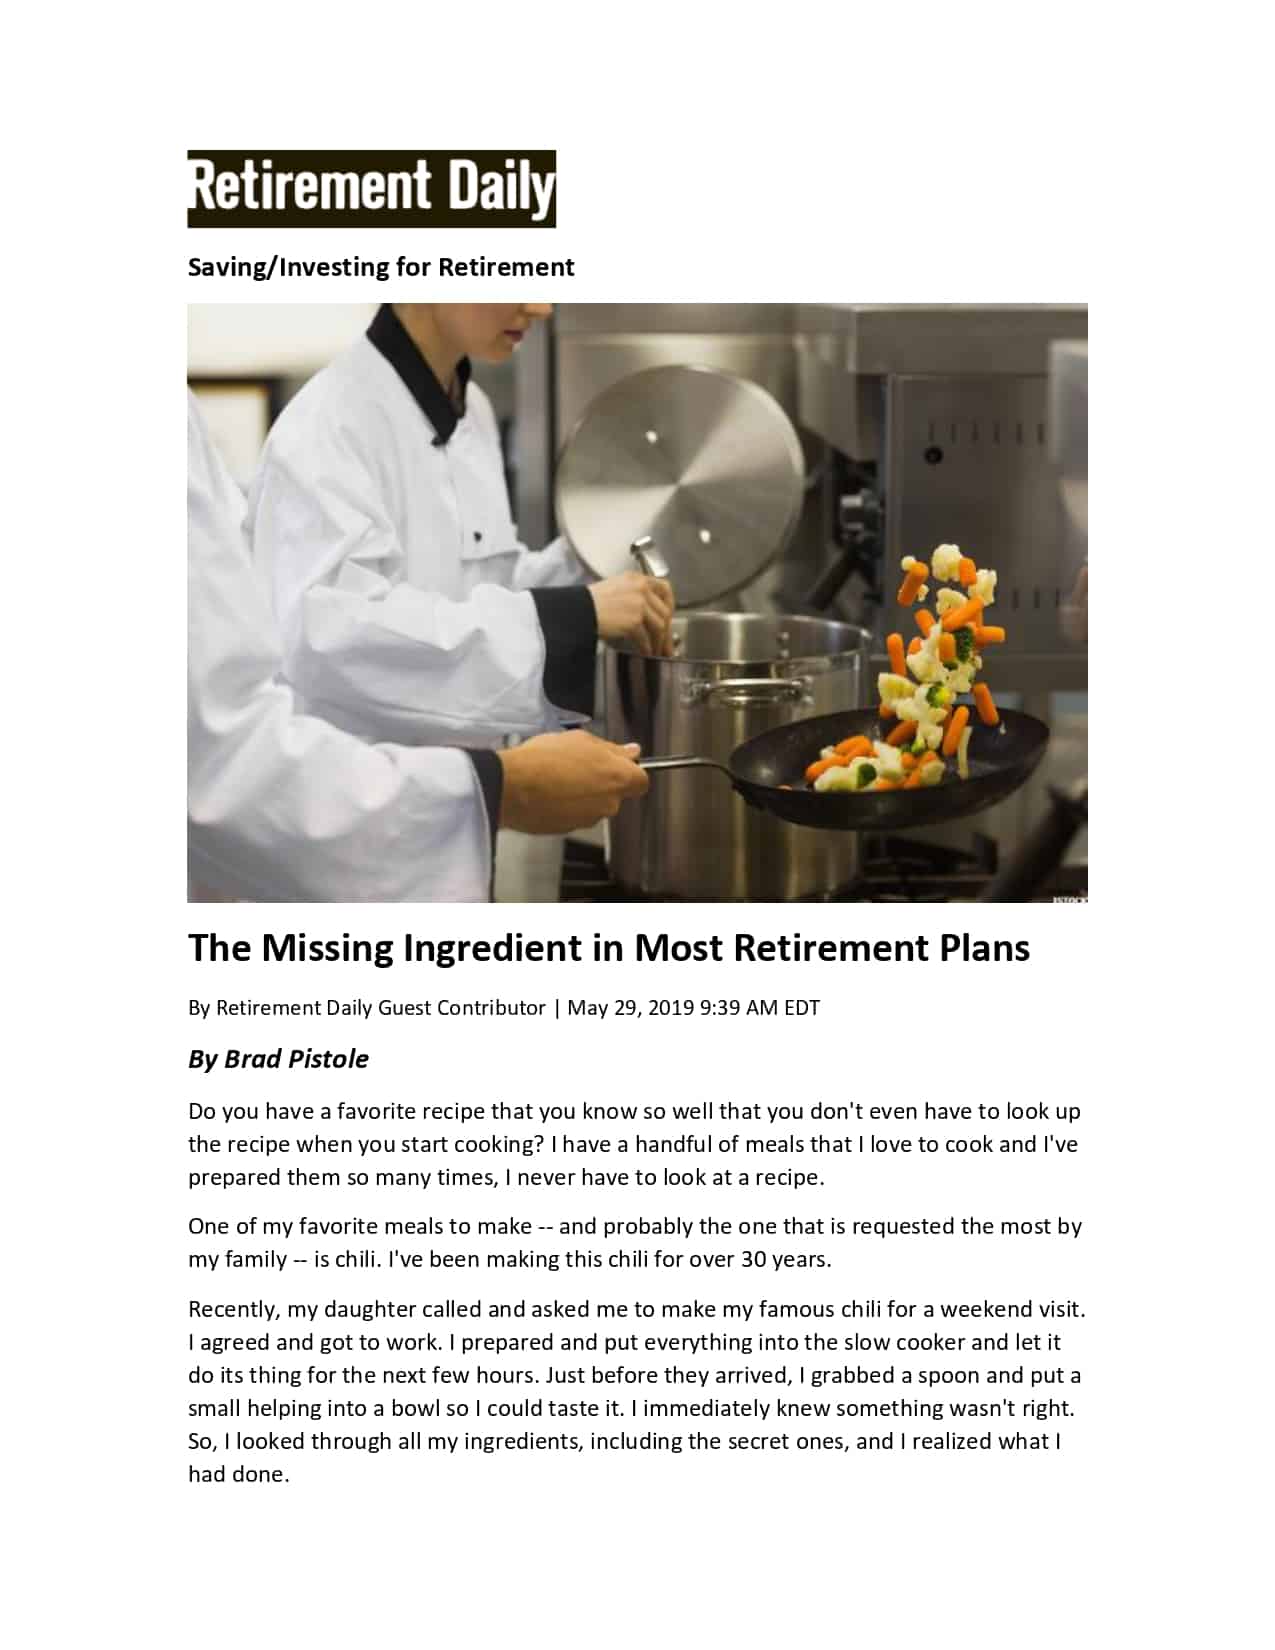 The Missing Ingredient in Most Retirement Plans